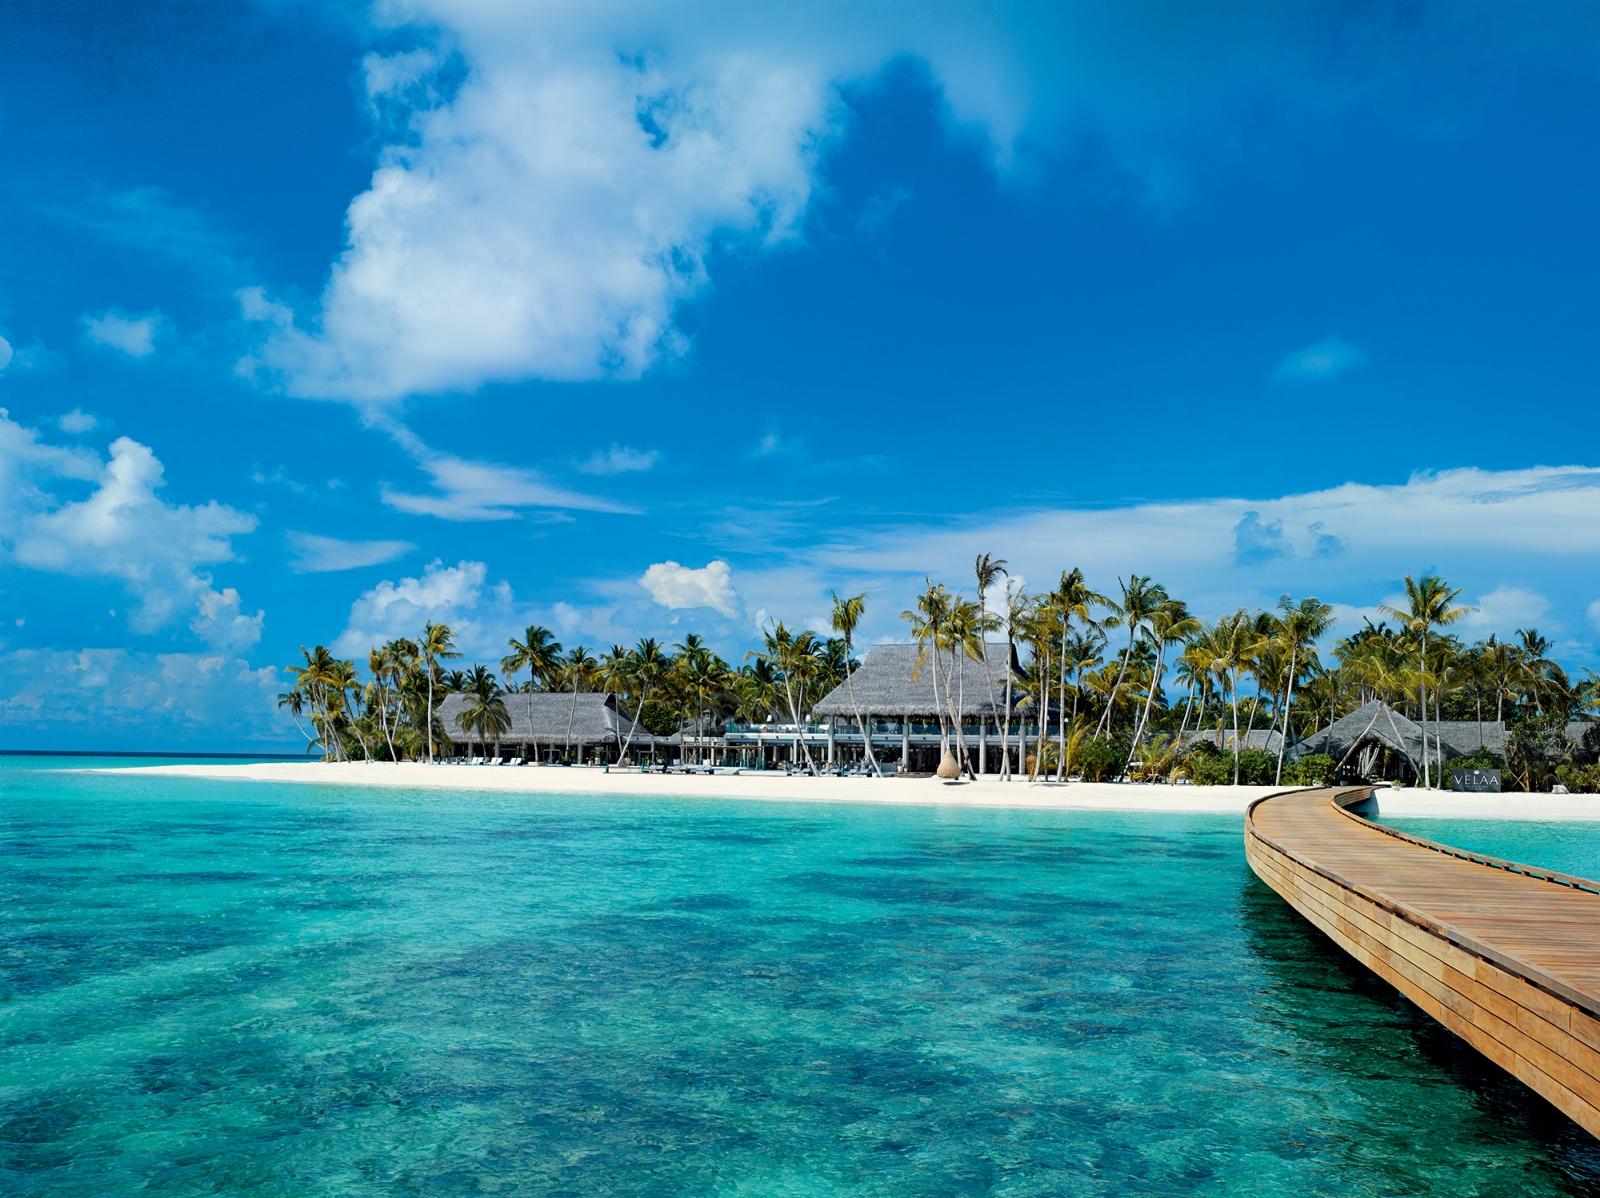 View of on Velaa Private Island in the Maldives including jetty and beach